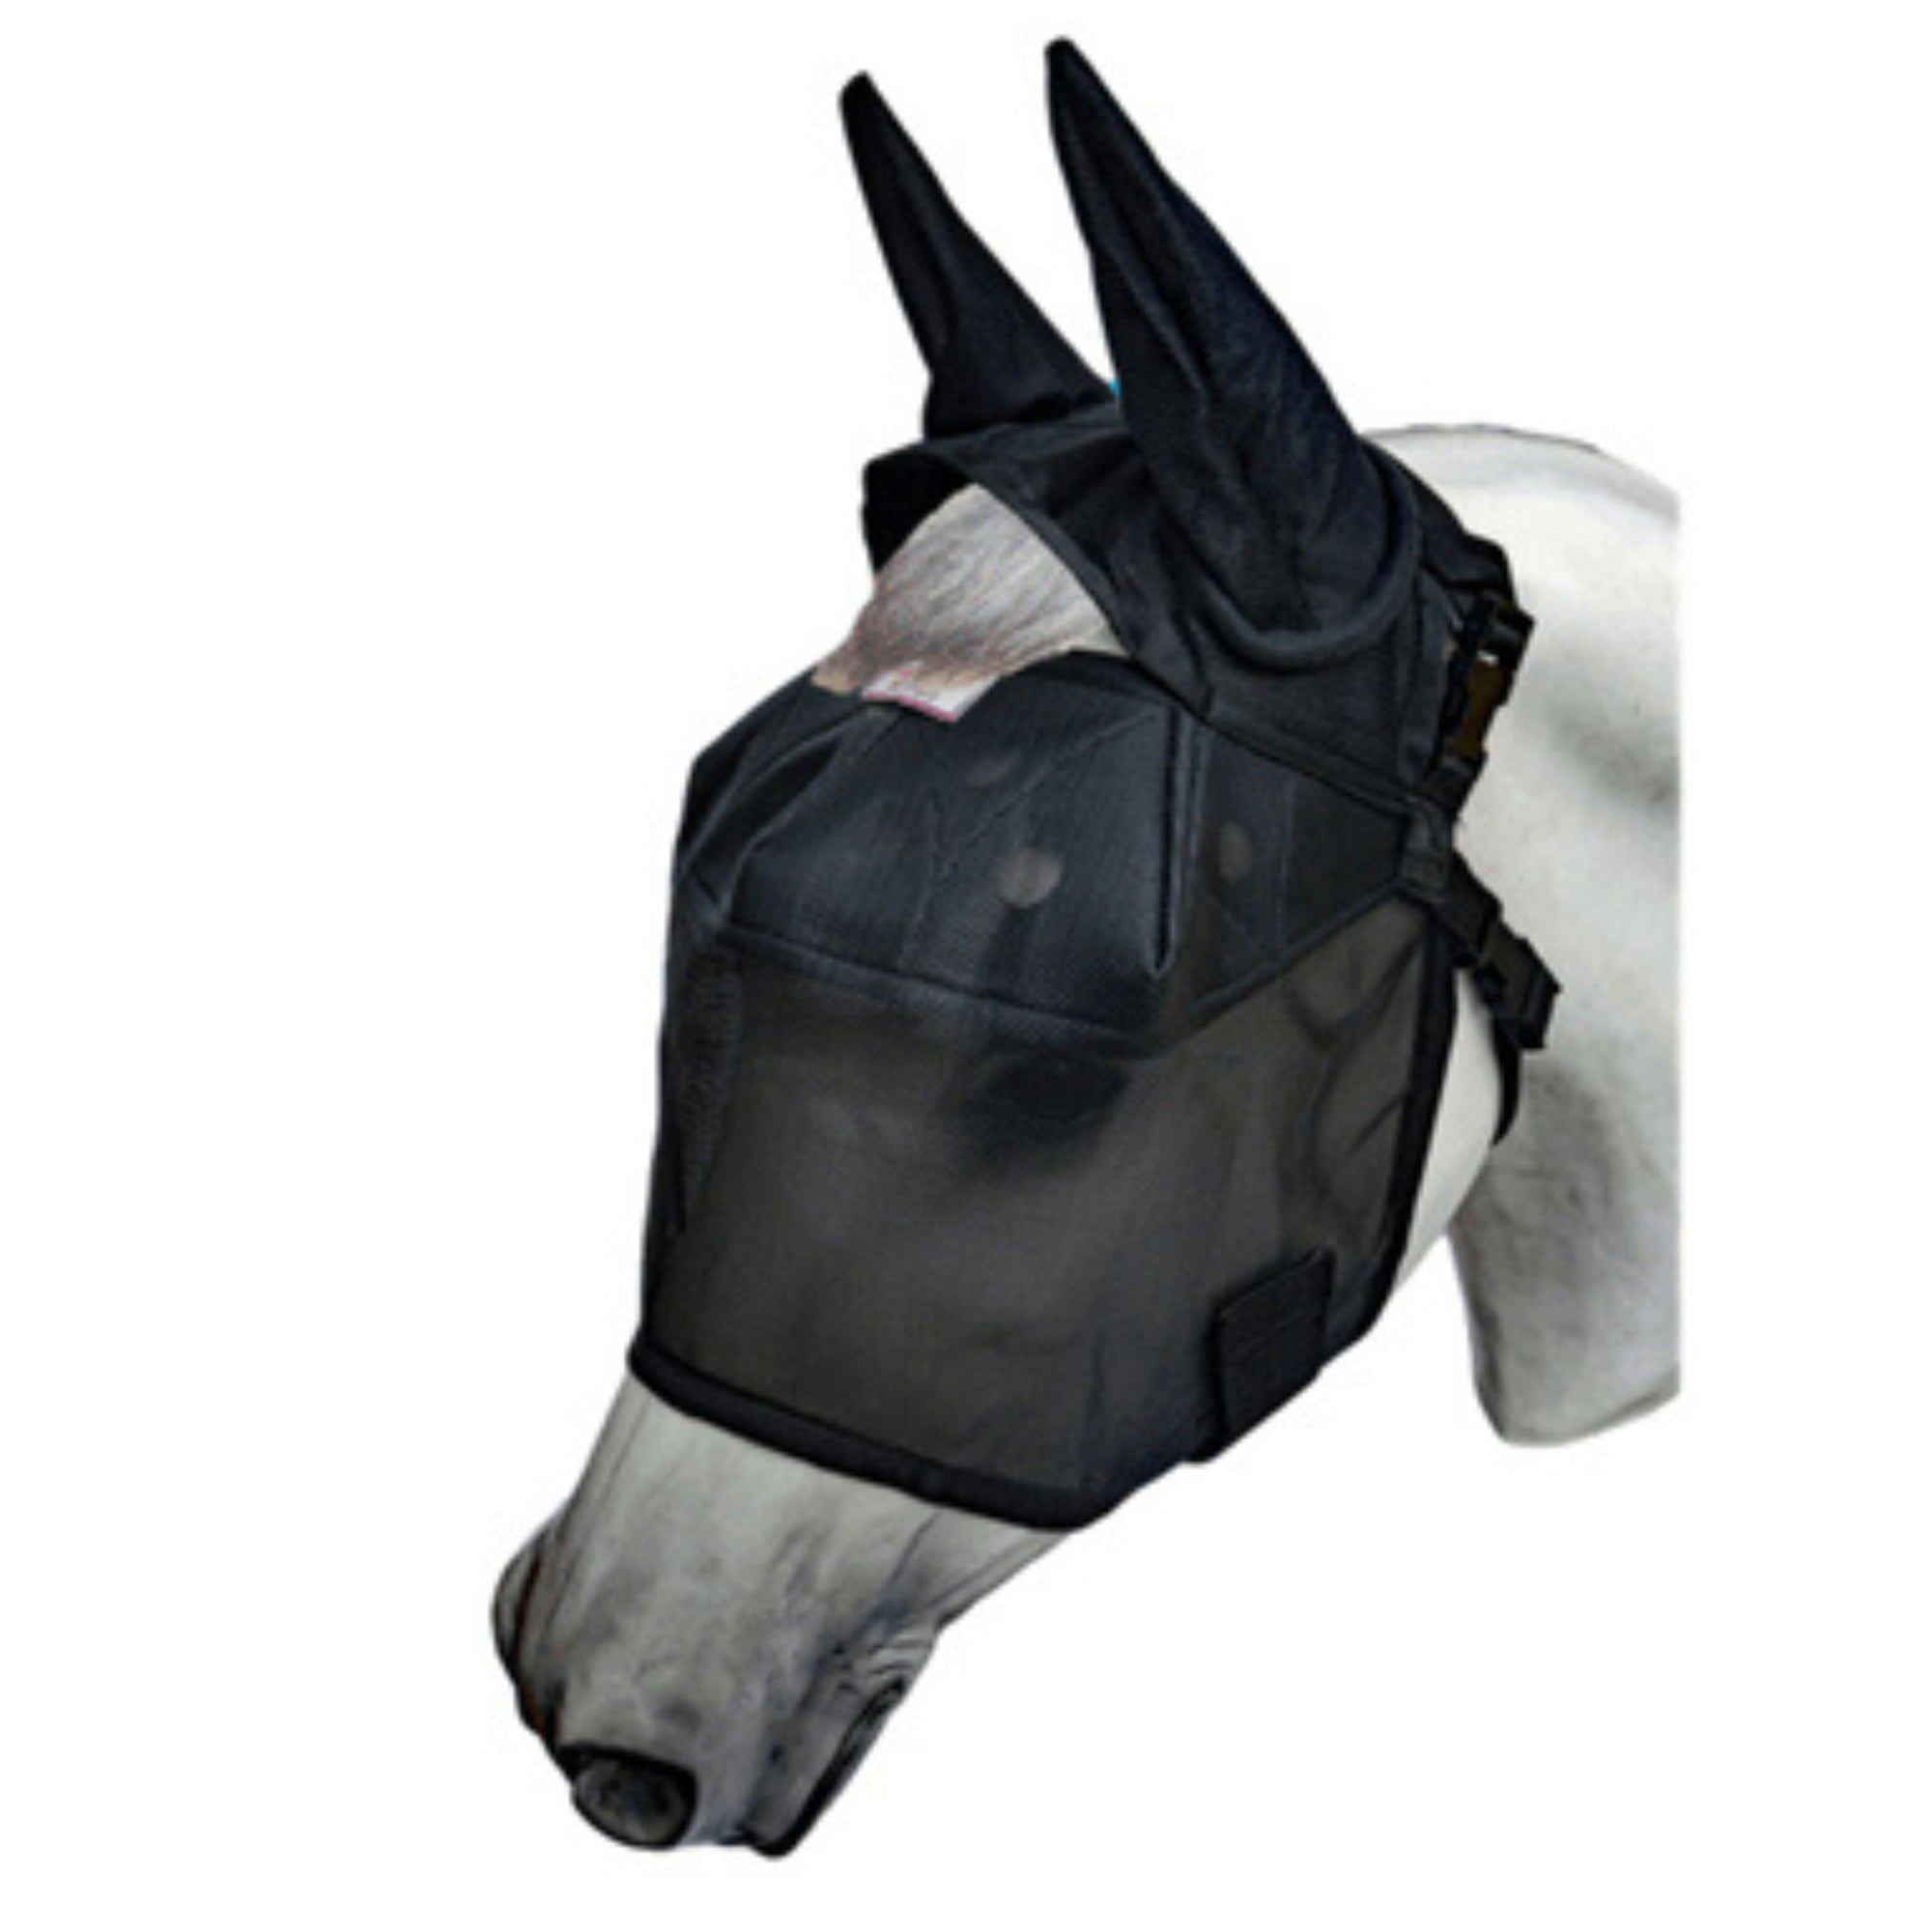 Side view of black fly mask with ear covering and three straps.